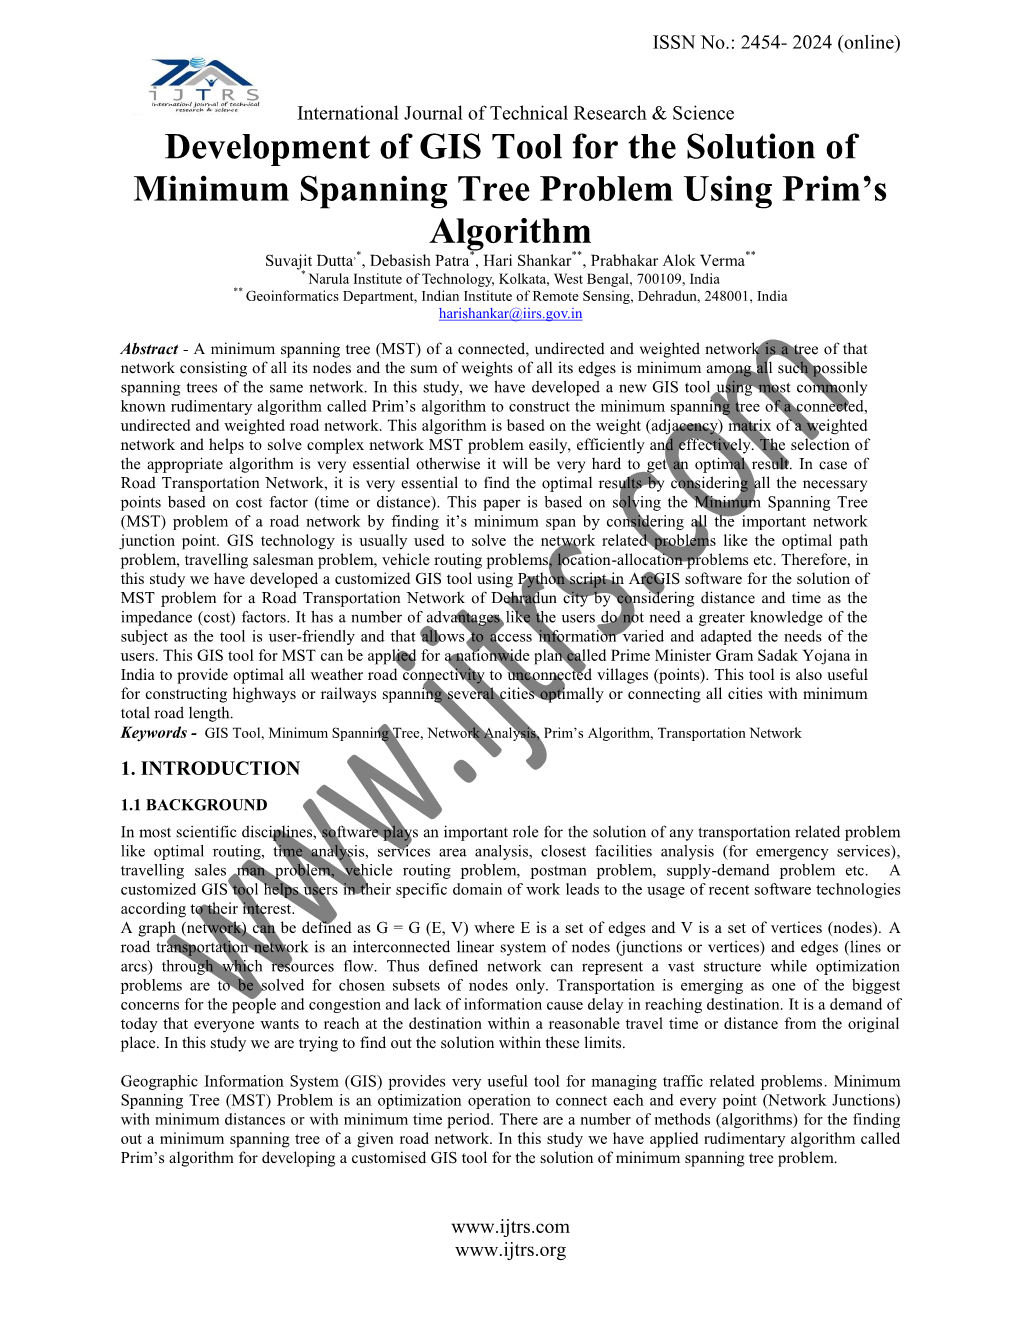 Development of GIS Tool for the Solution of Minimum Spanning Tree